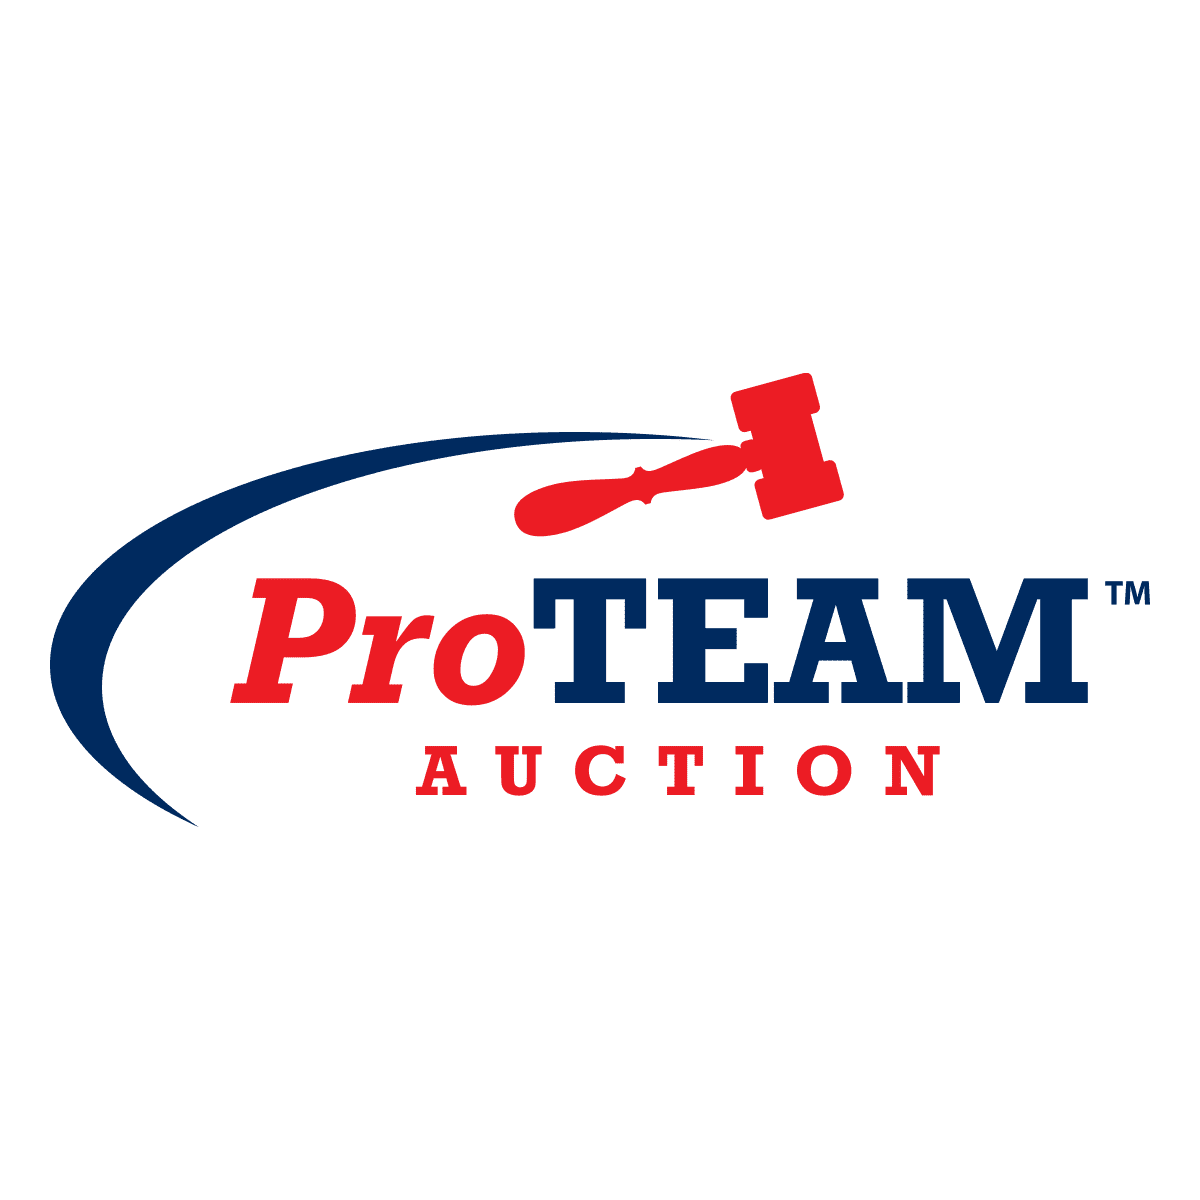 www.proteamauction.com